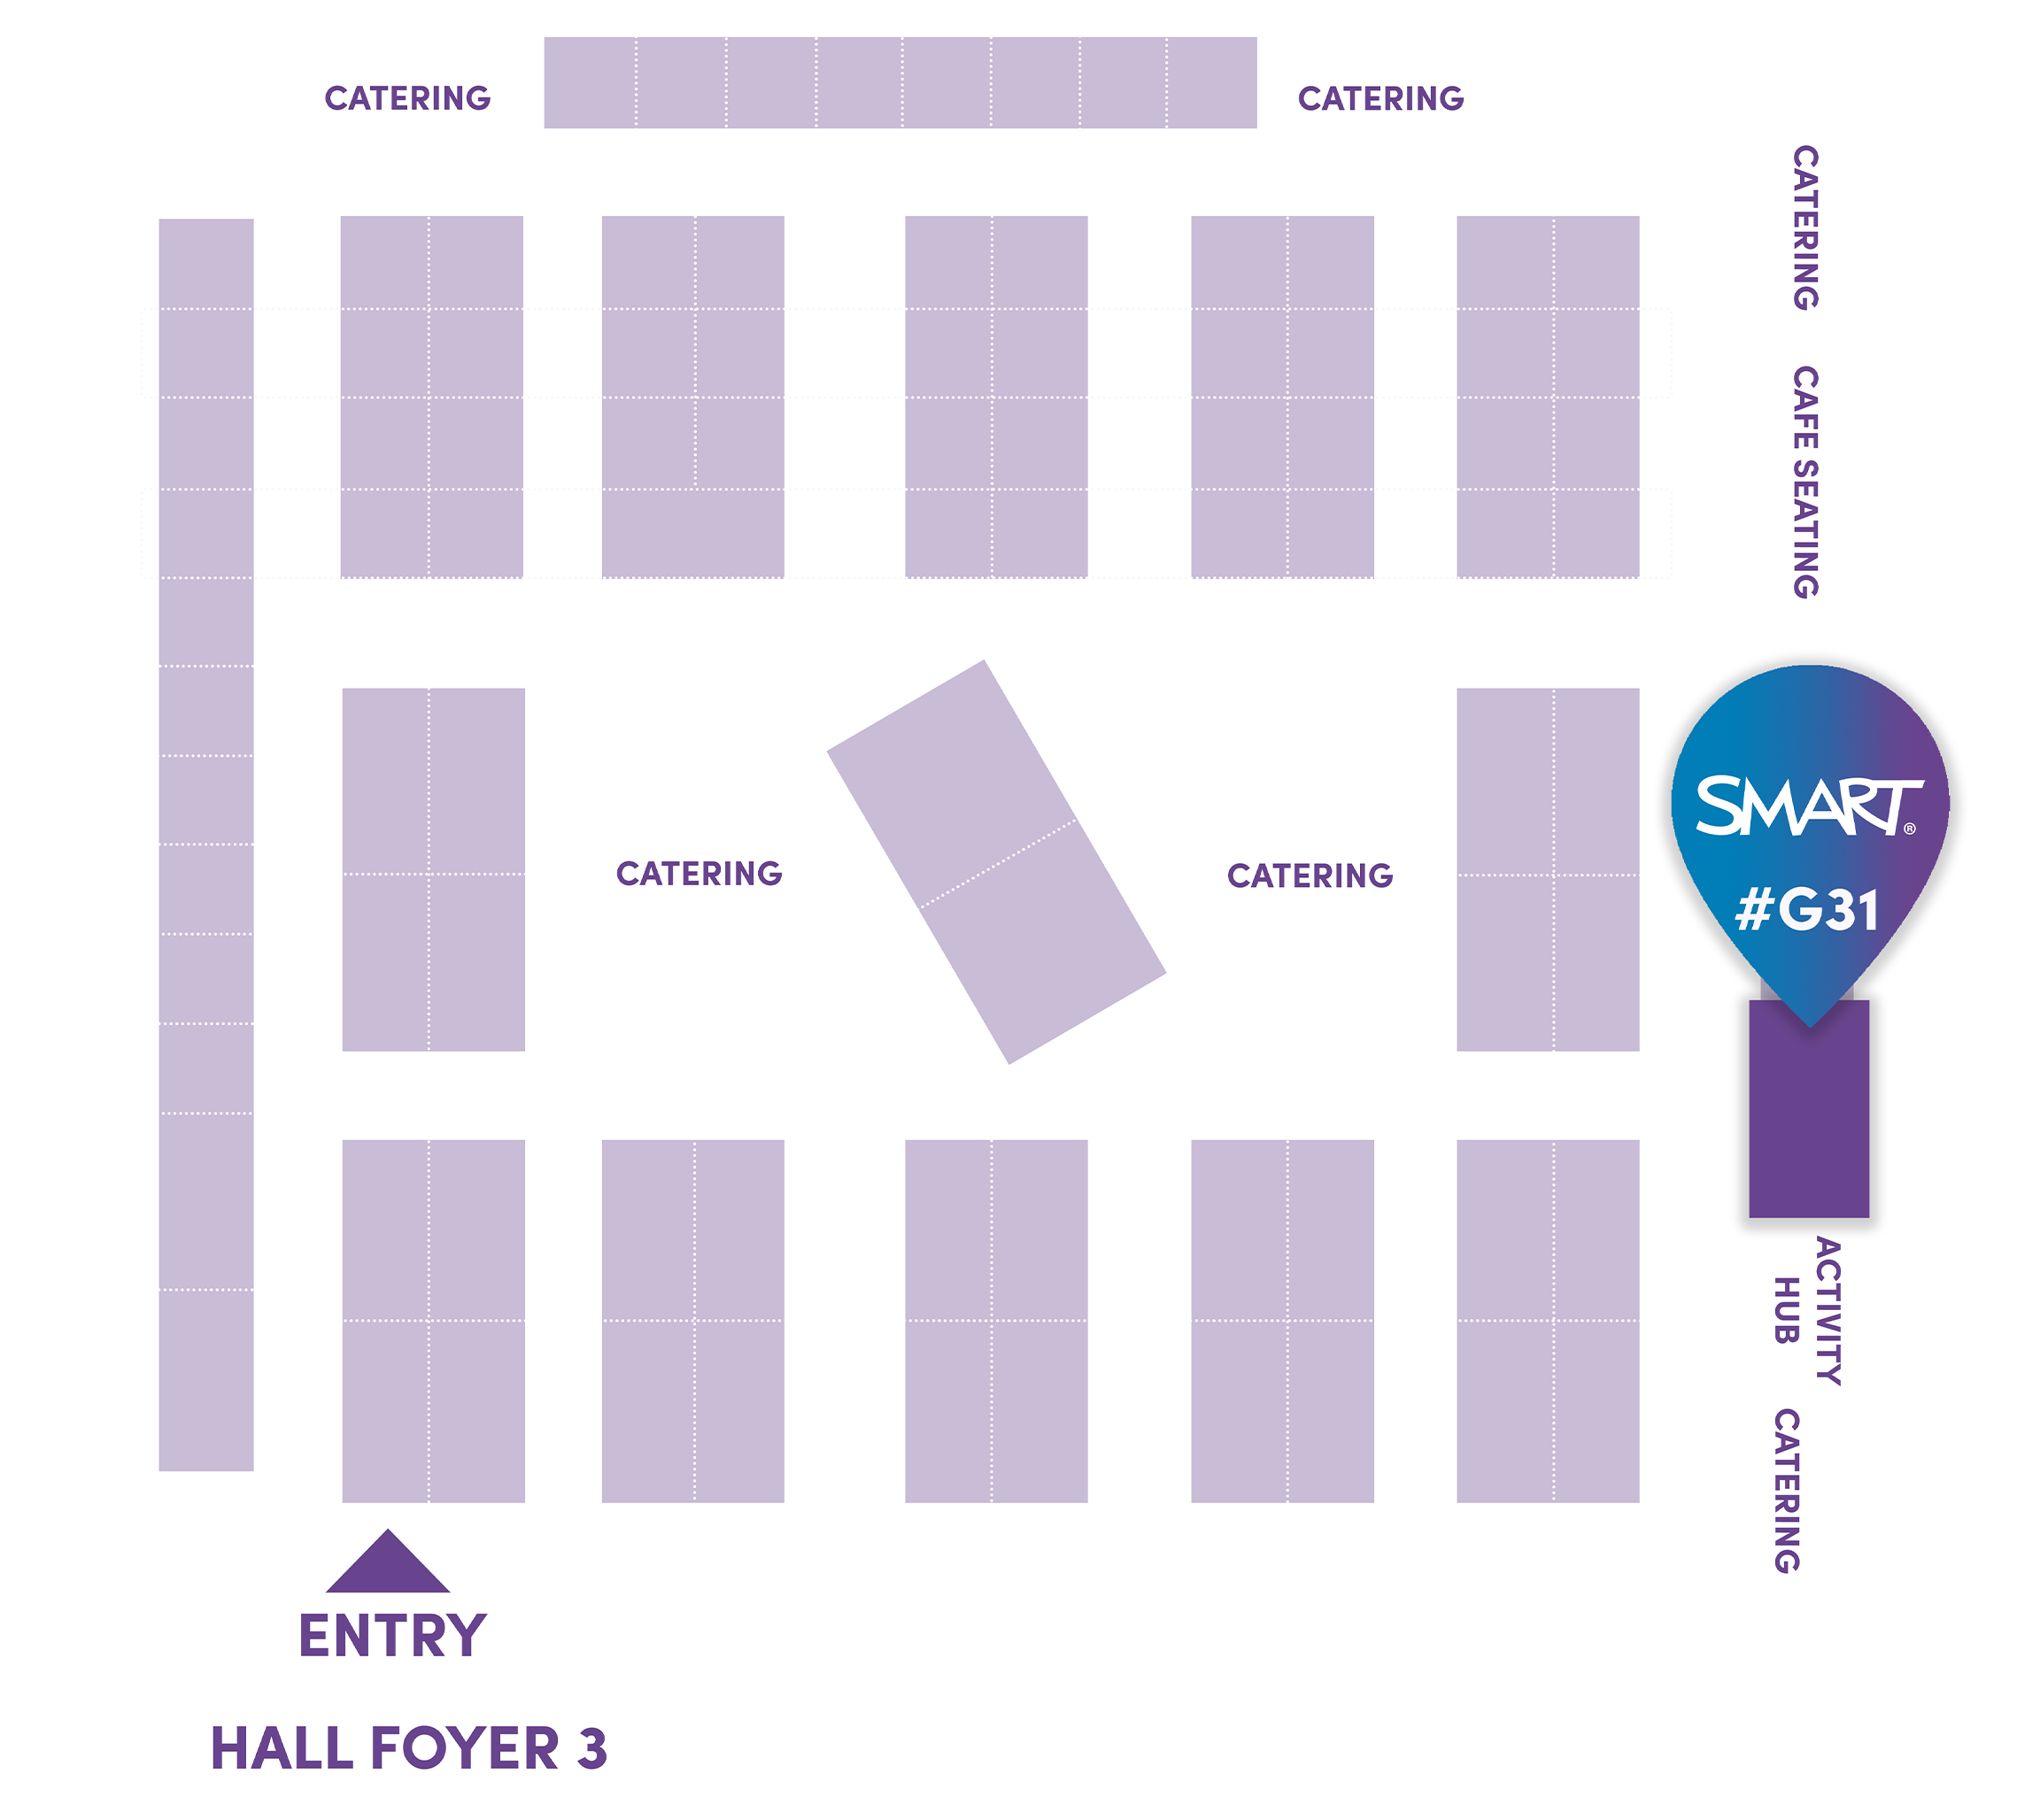 An AIS event map showing the location of the SMART booth at booth G31.